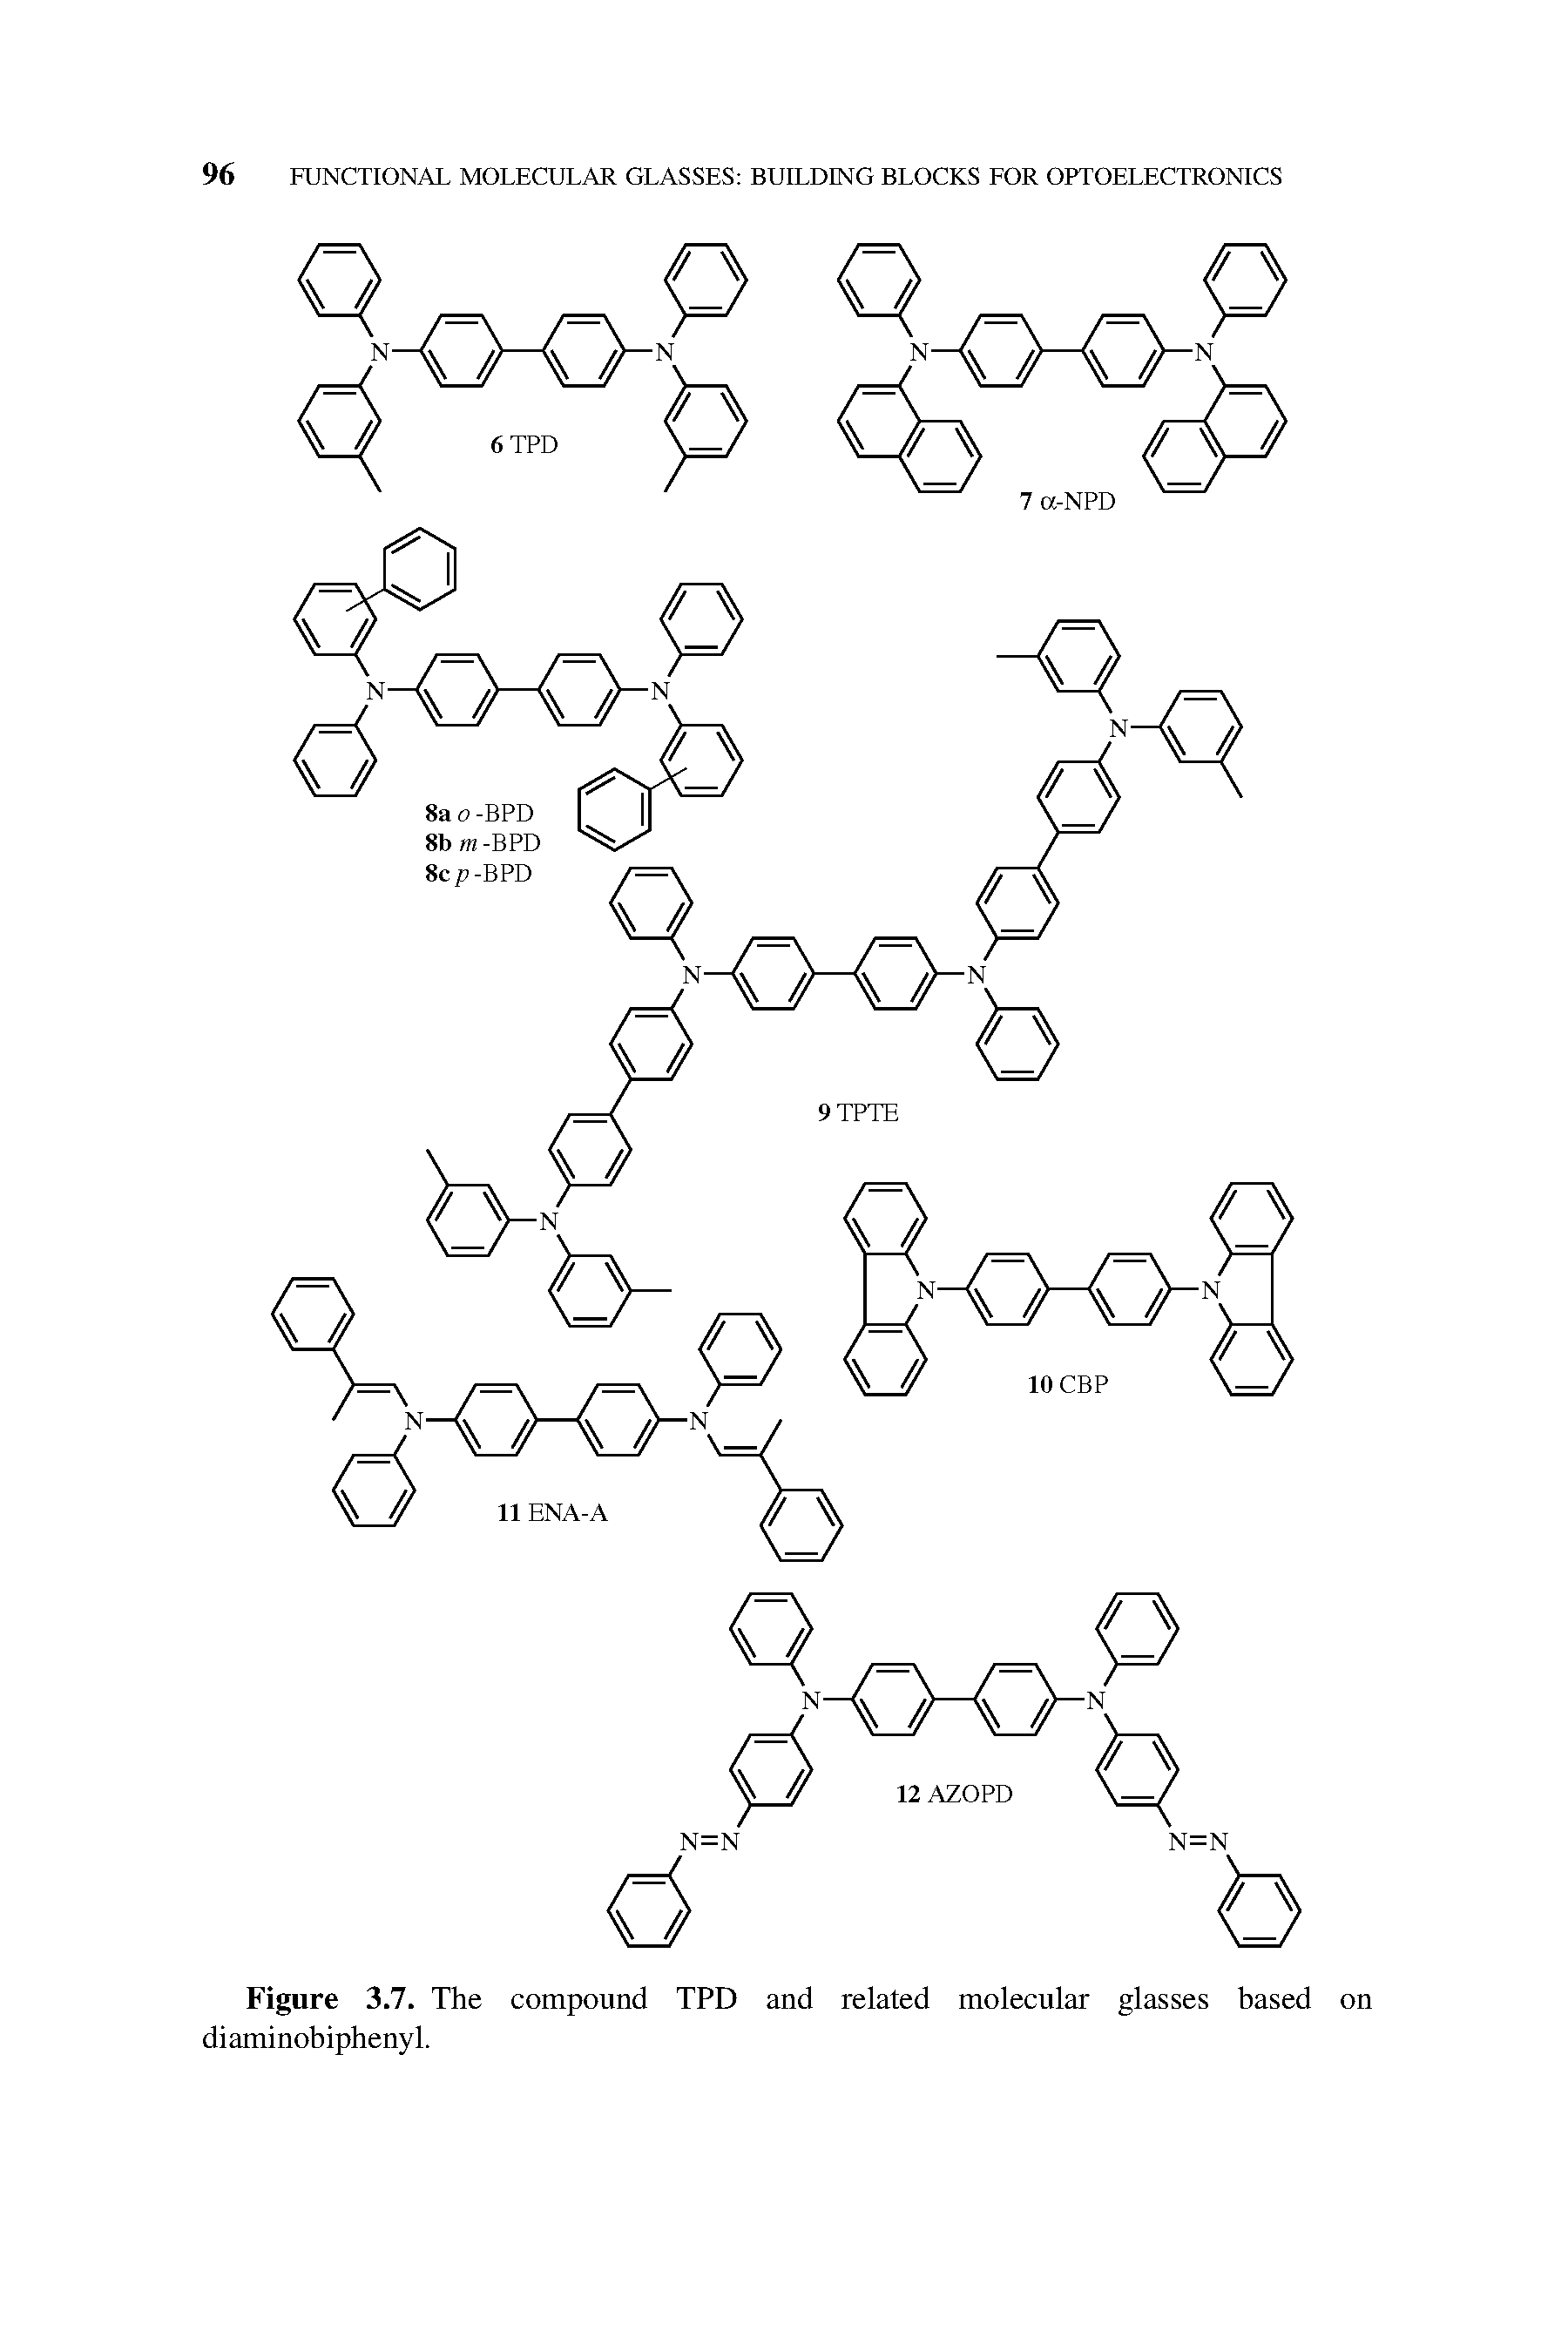 Figure 3.7. The compound TPD and related molecular glasses based on diaminobiphenyl.